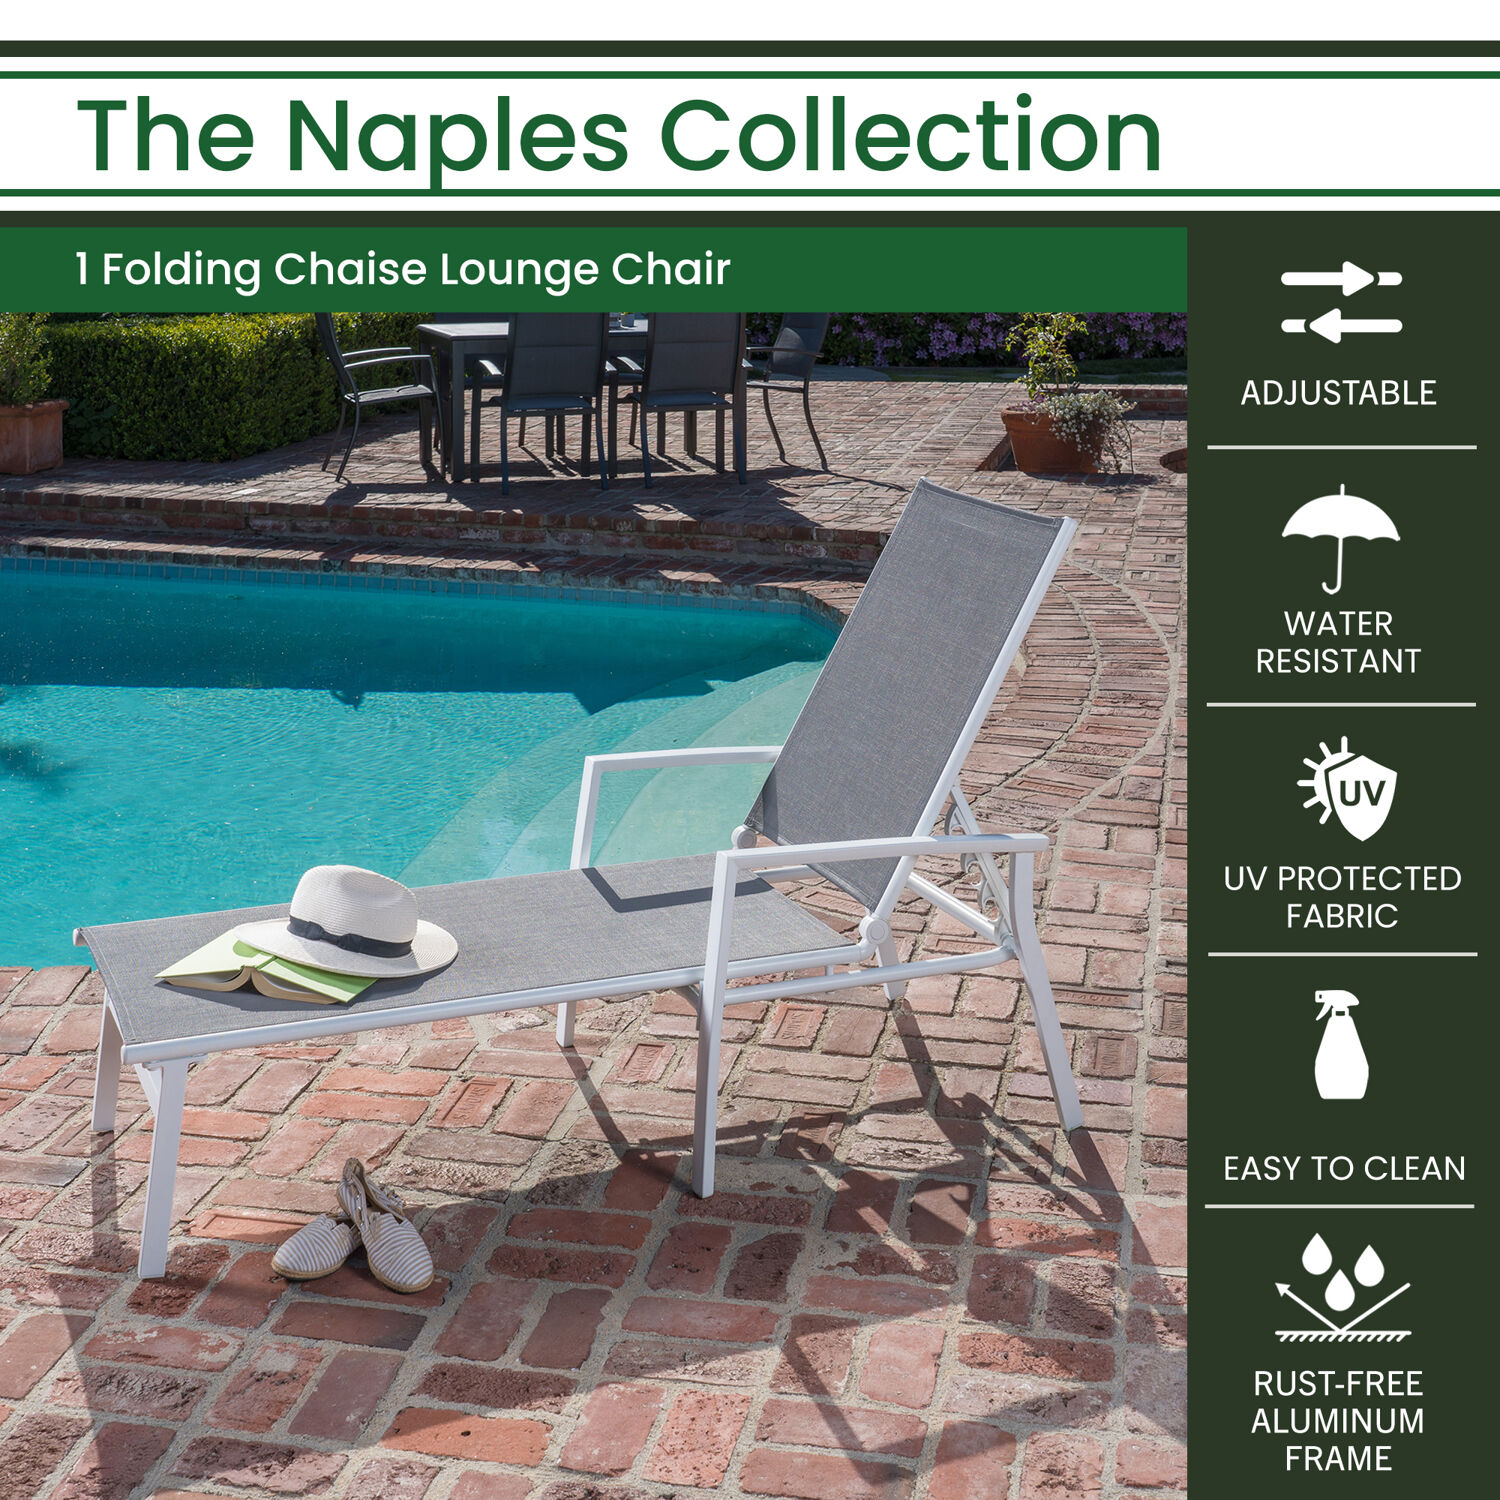 Hanover Naples 2x2 Sling Outdoor Folding Chaise Lounge Chair, Gray - image 5 of 19